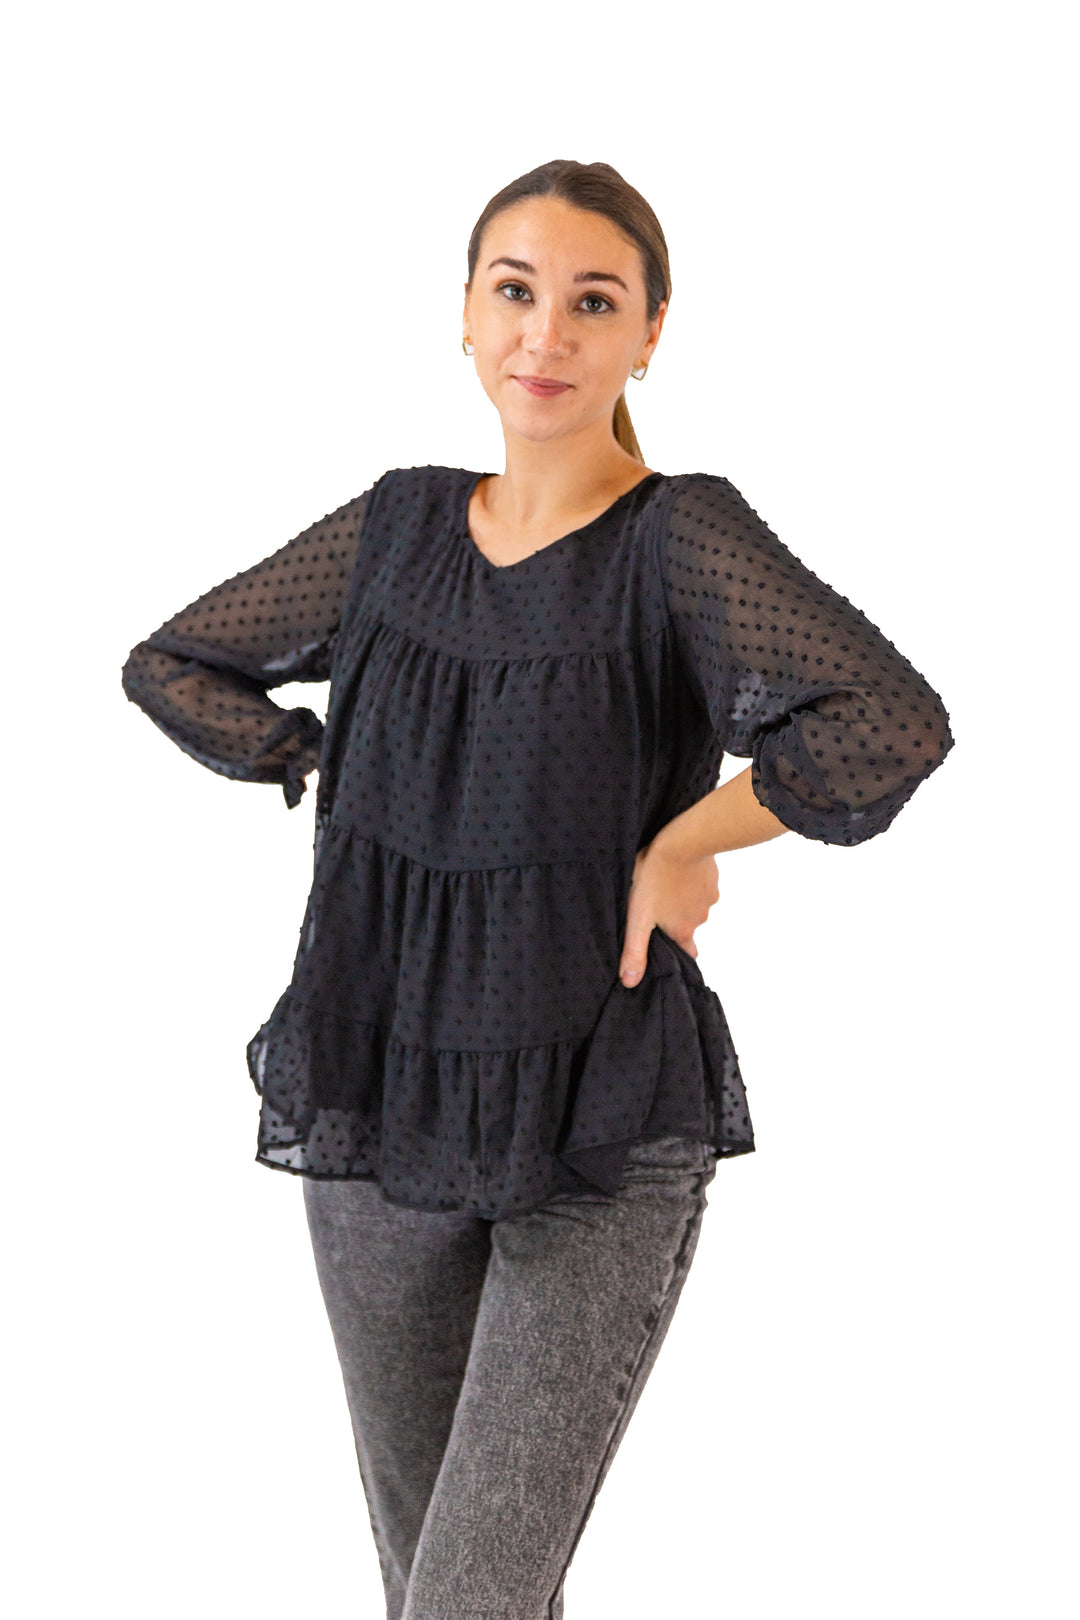 Fabonics Dotted Elegance Black Full-Sleeved Casual Top with Subtle Polka Dots